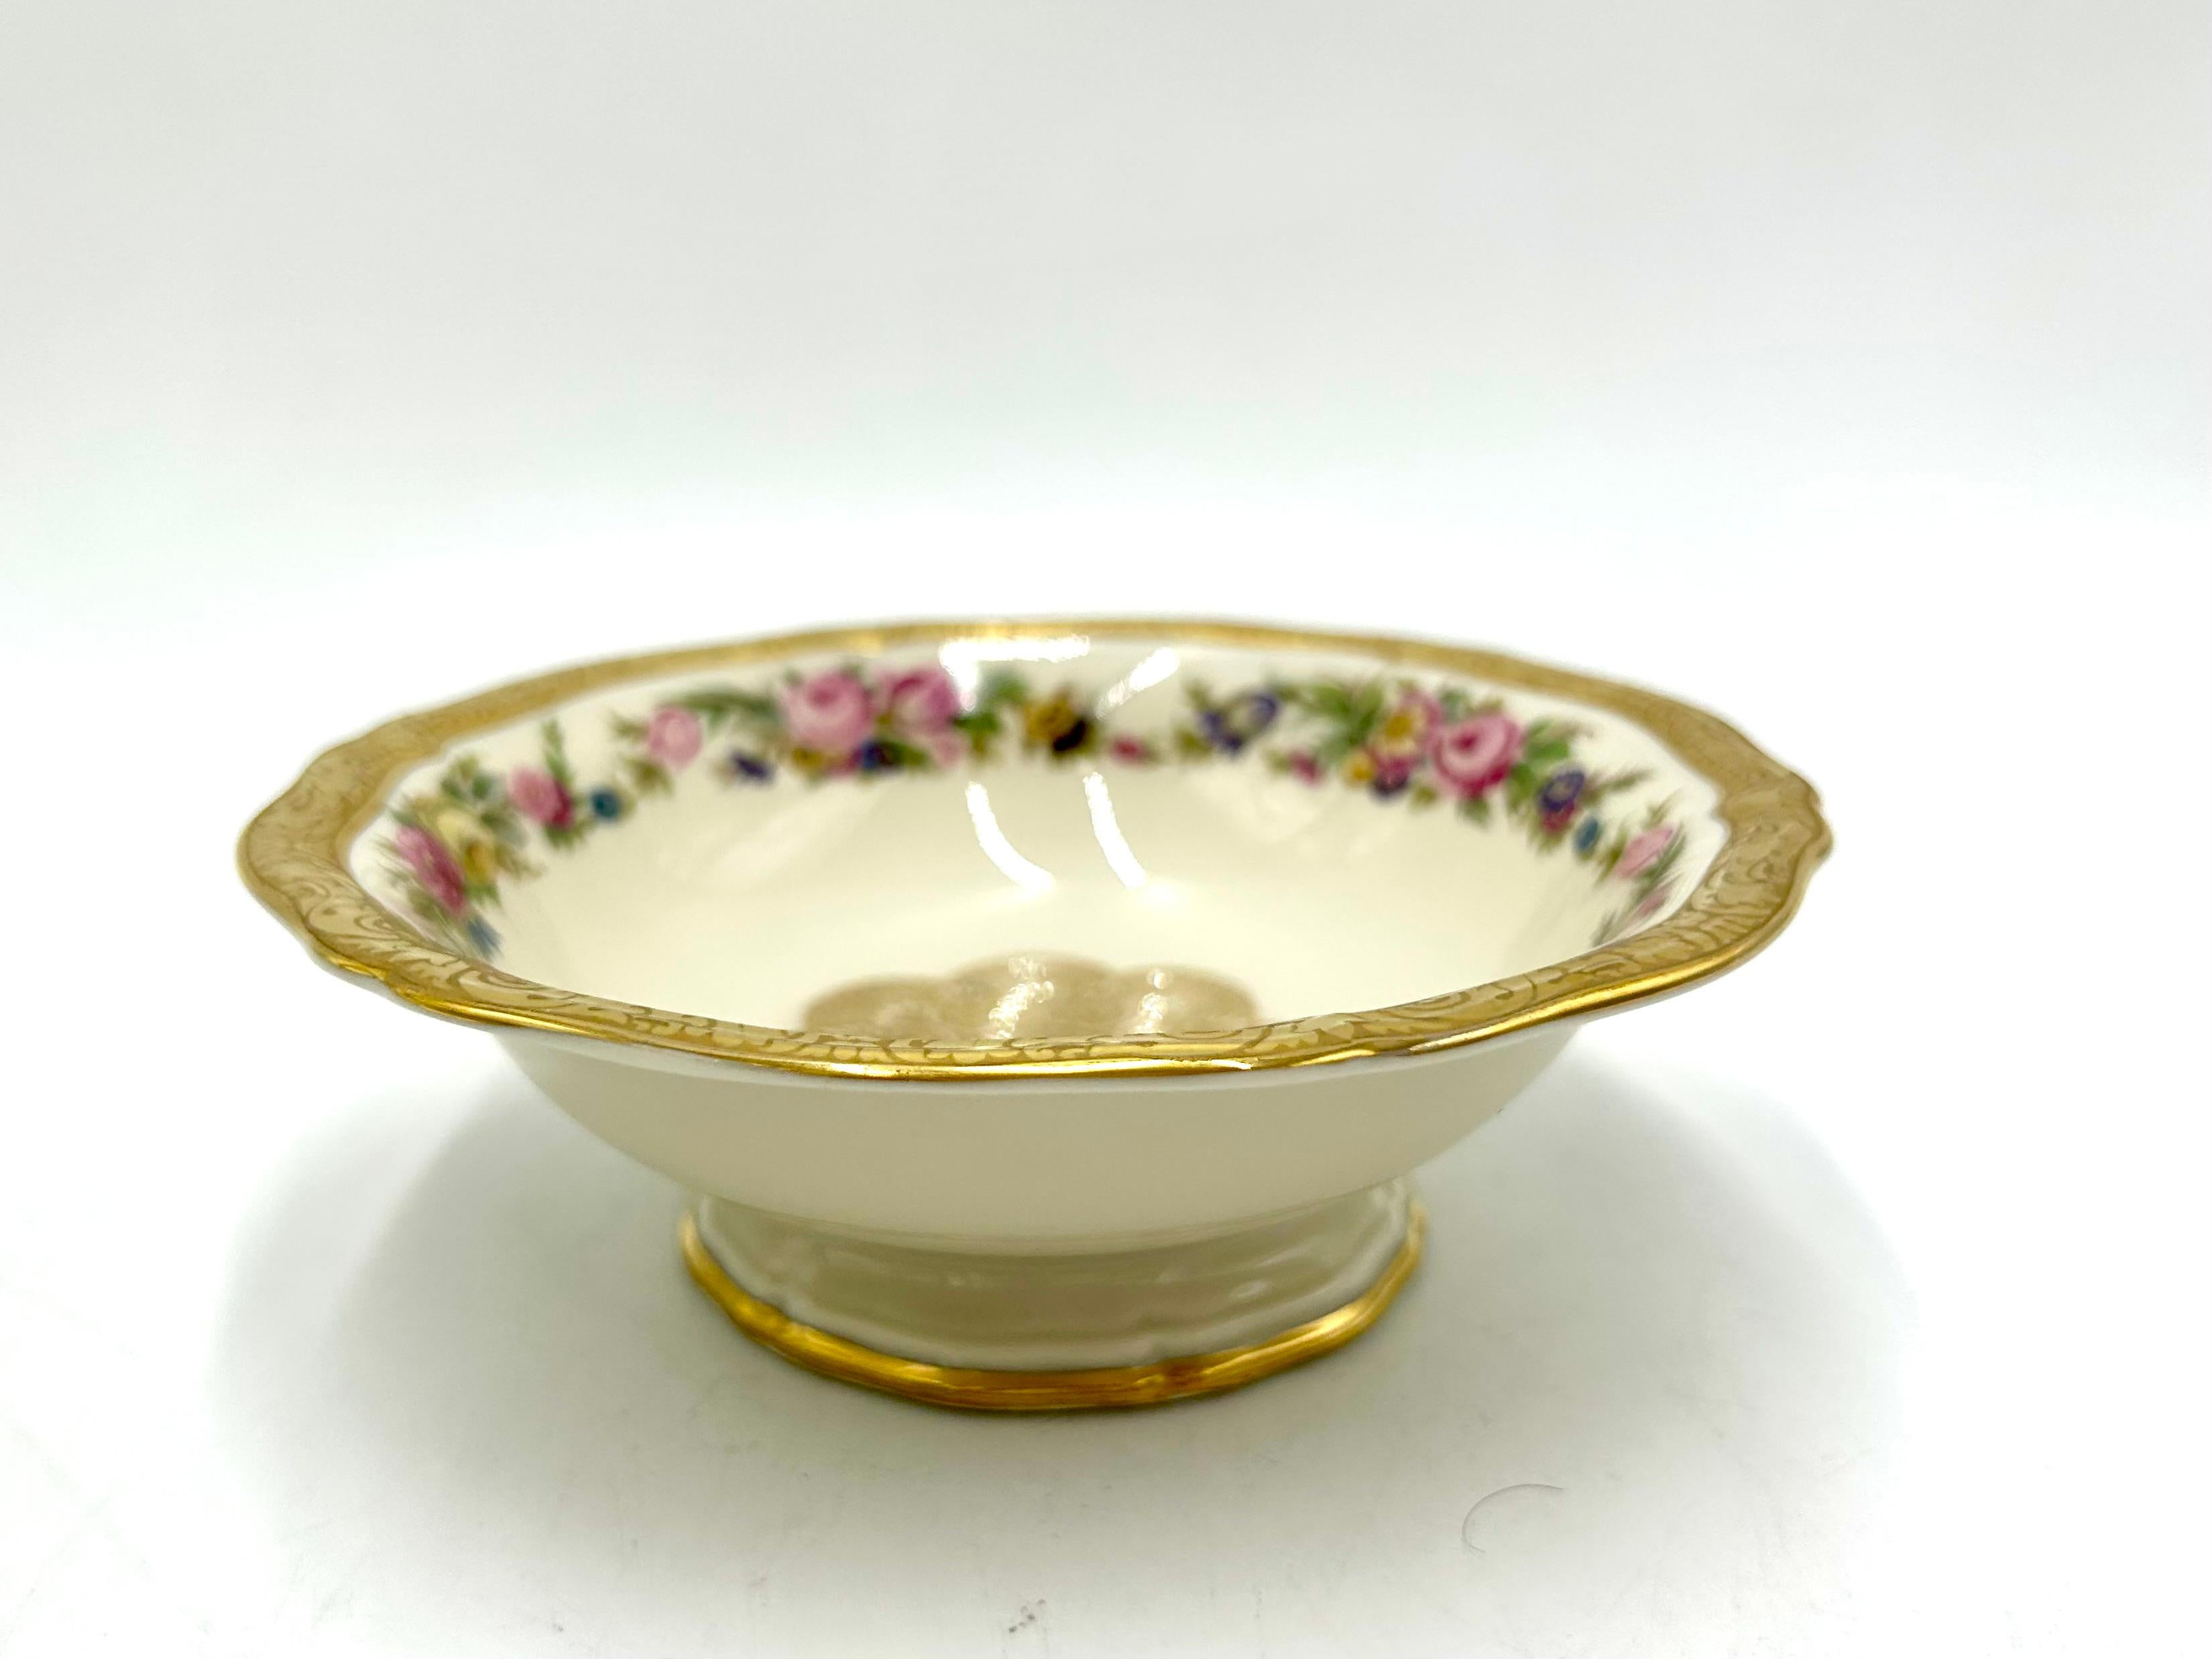 Beautiful porcelain platter-bowl in ecru color decorated with gilding and a floral motif
A product of the valued German manufacturer Rosenthal, marked with the mark used in 1948.
A platter from the classic elegant Chippendale series.
Very good